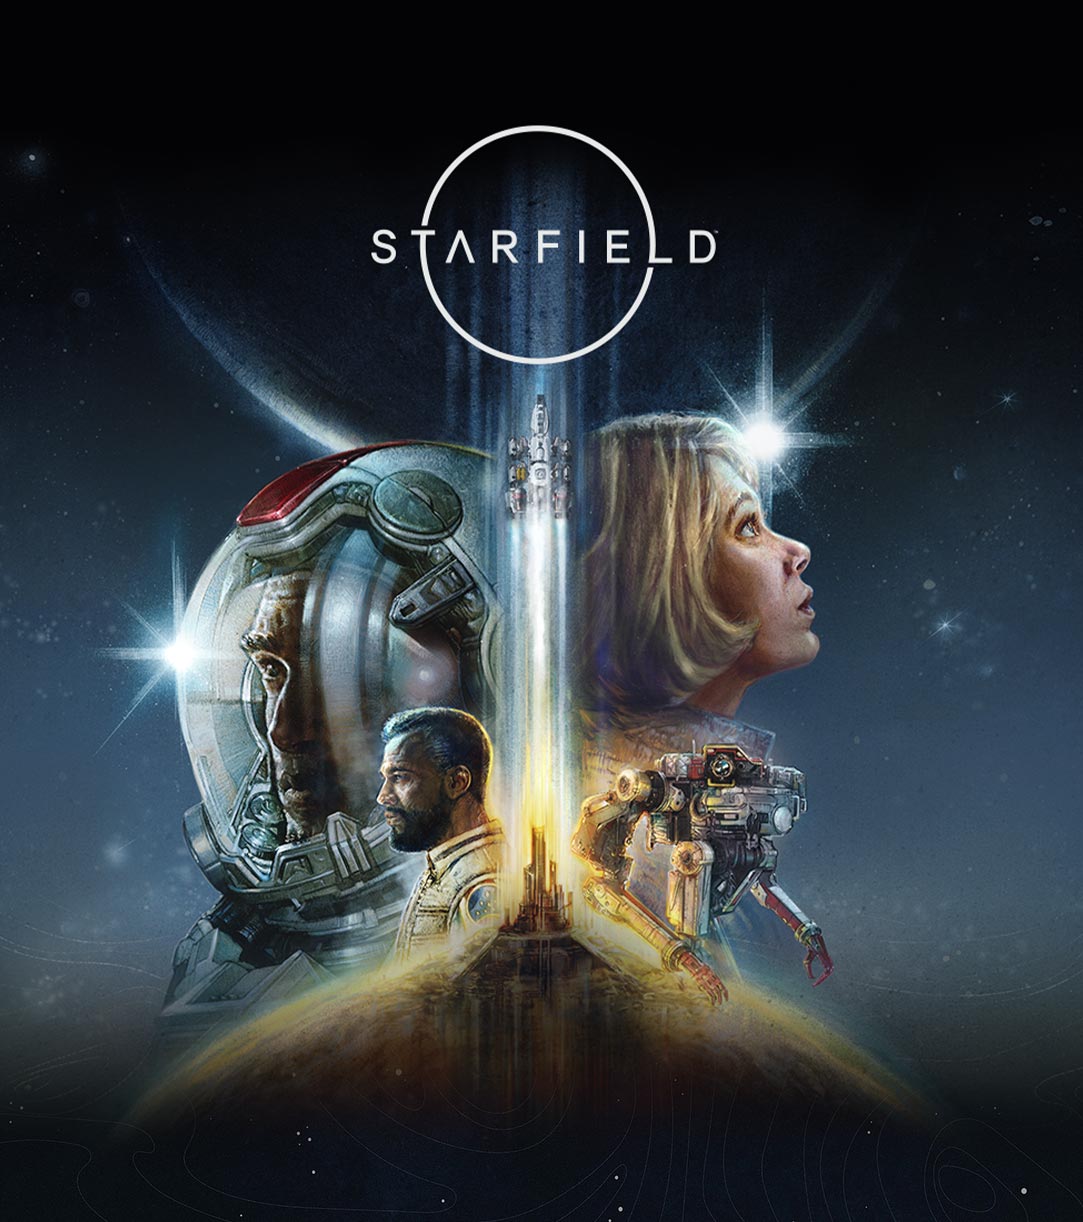 Starfield: Available Now on Console, PC, and Game Pass | Xbox